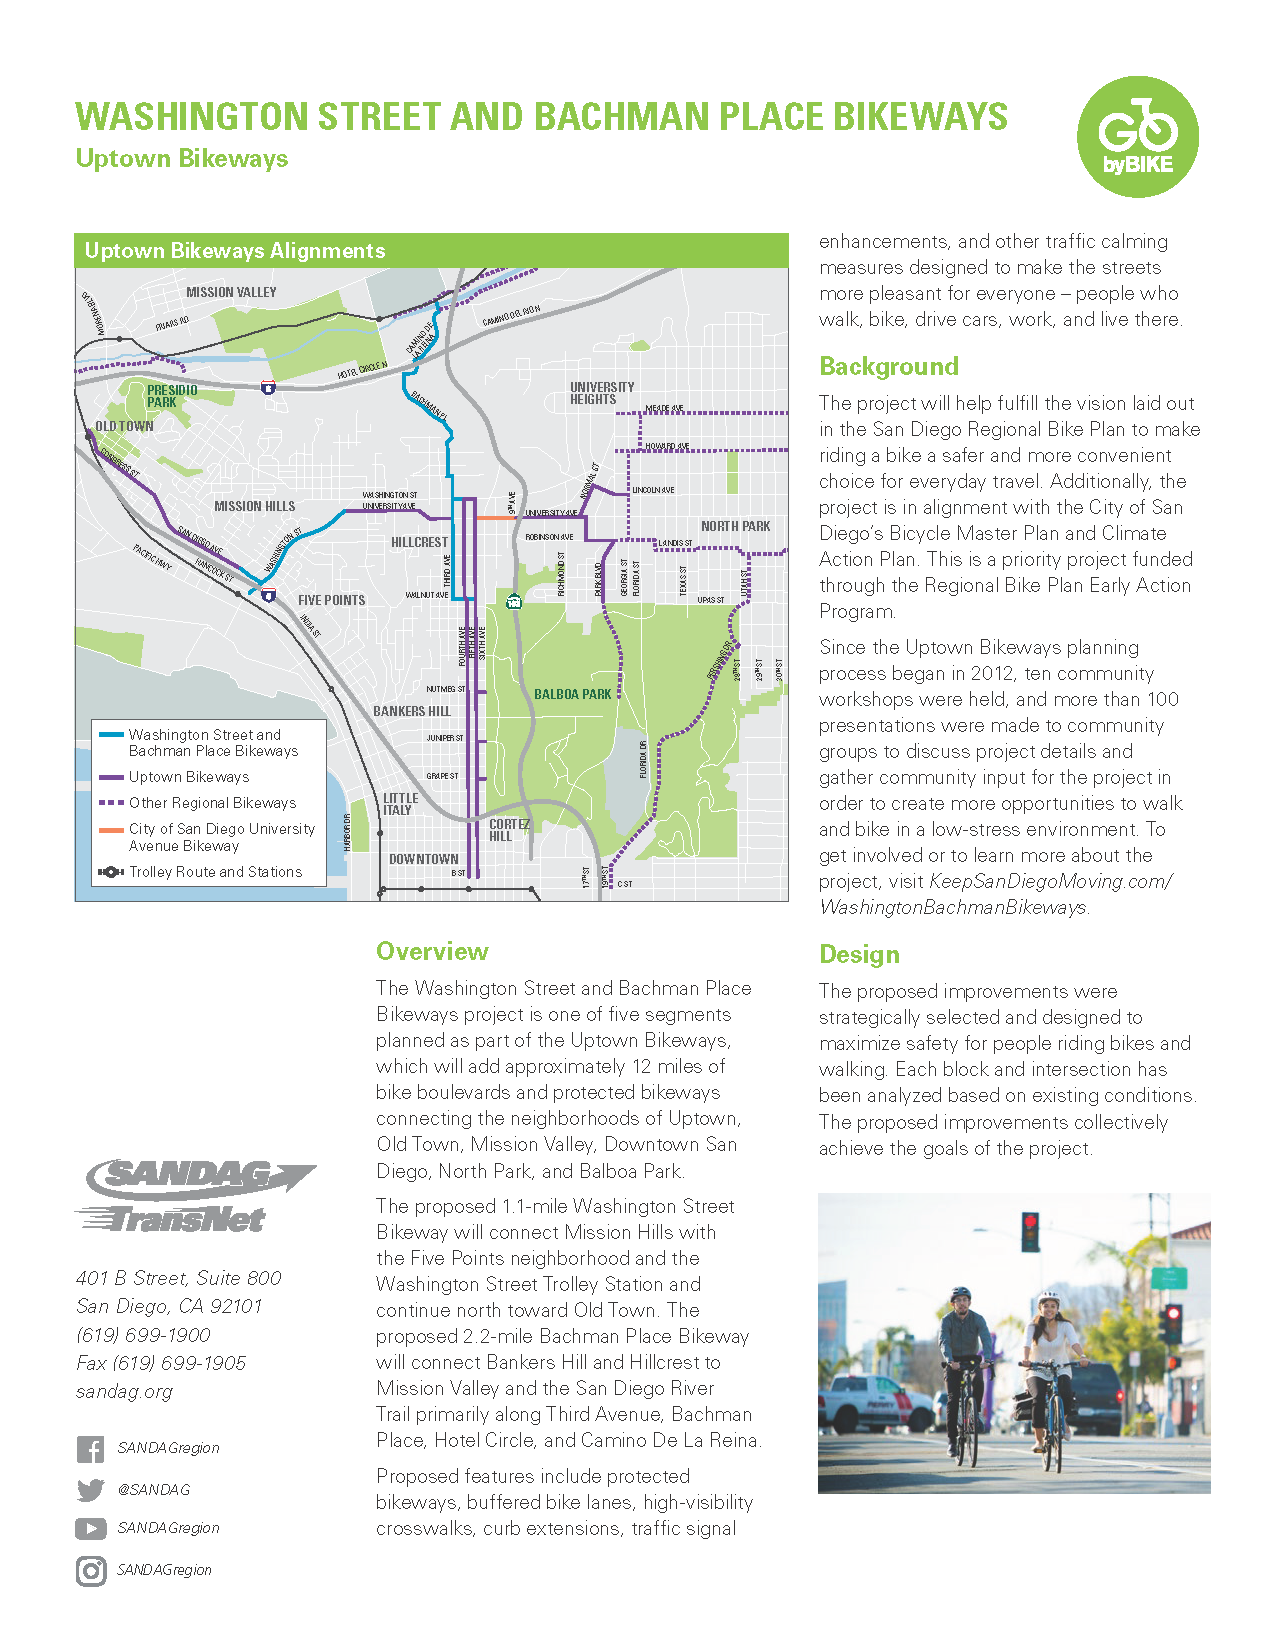 View the Washington Street and Bachman Place Bikeways project fact sheet in English.